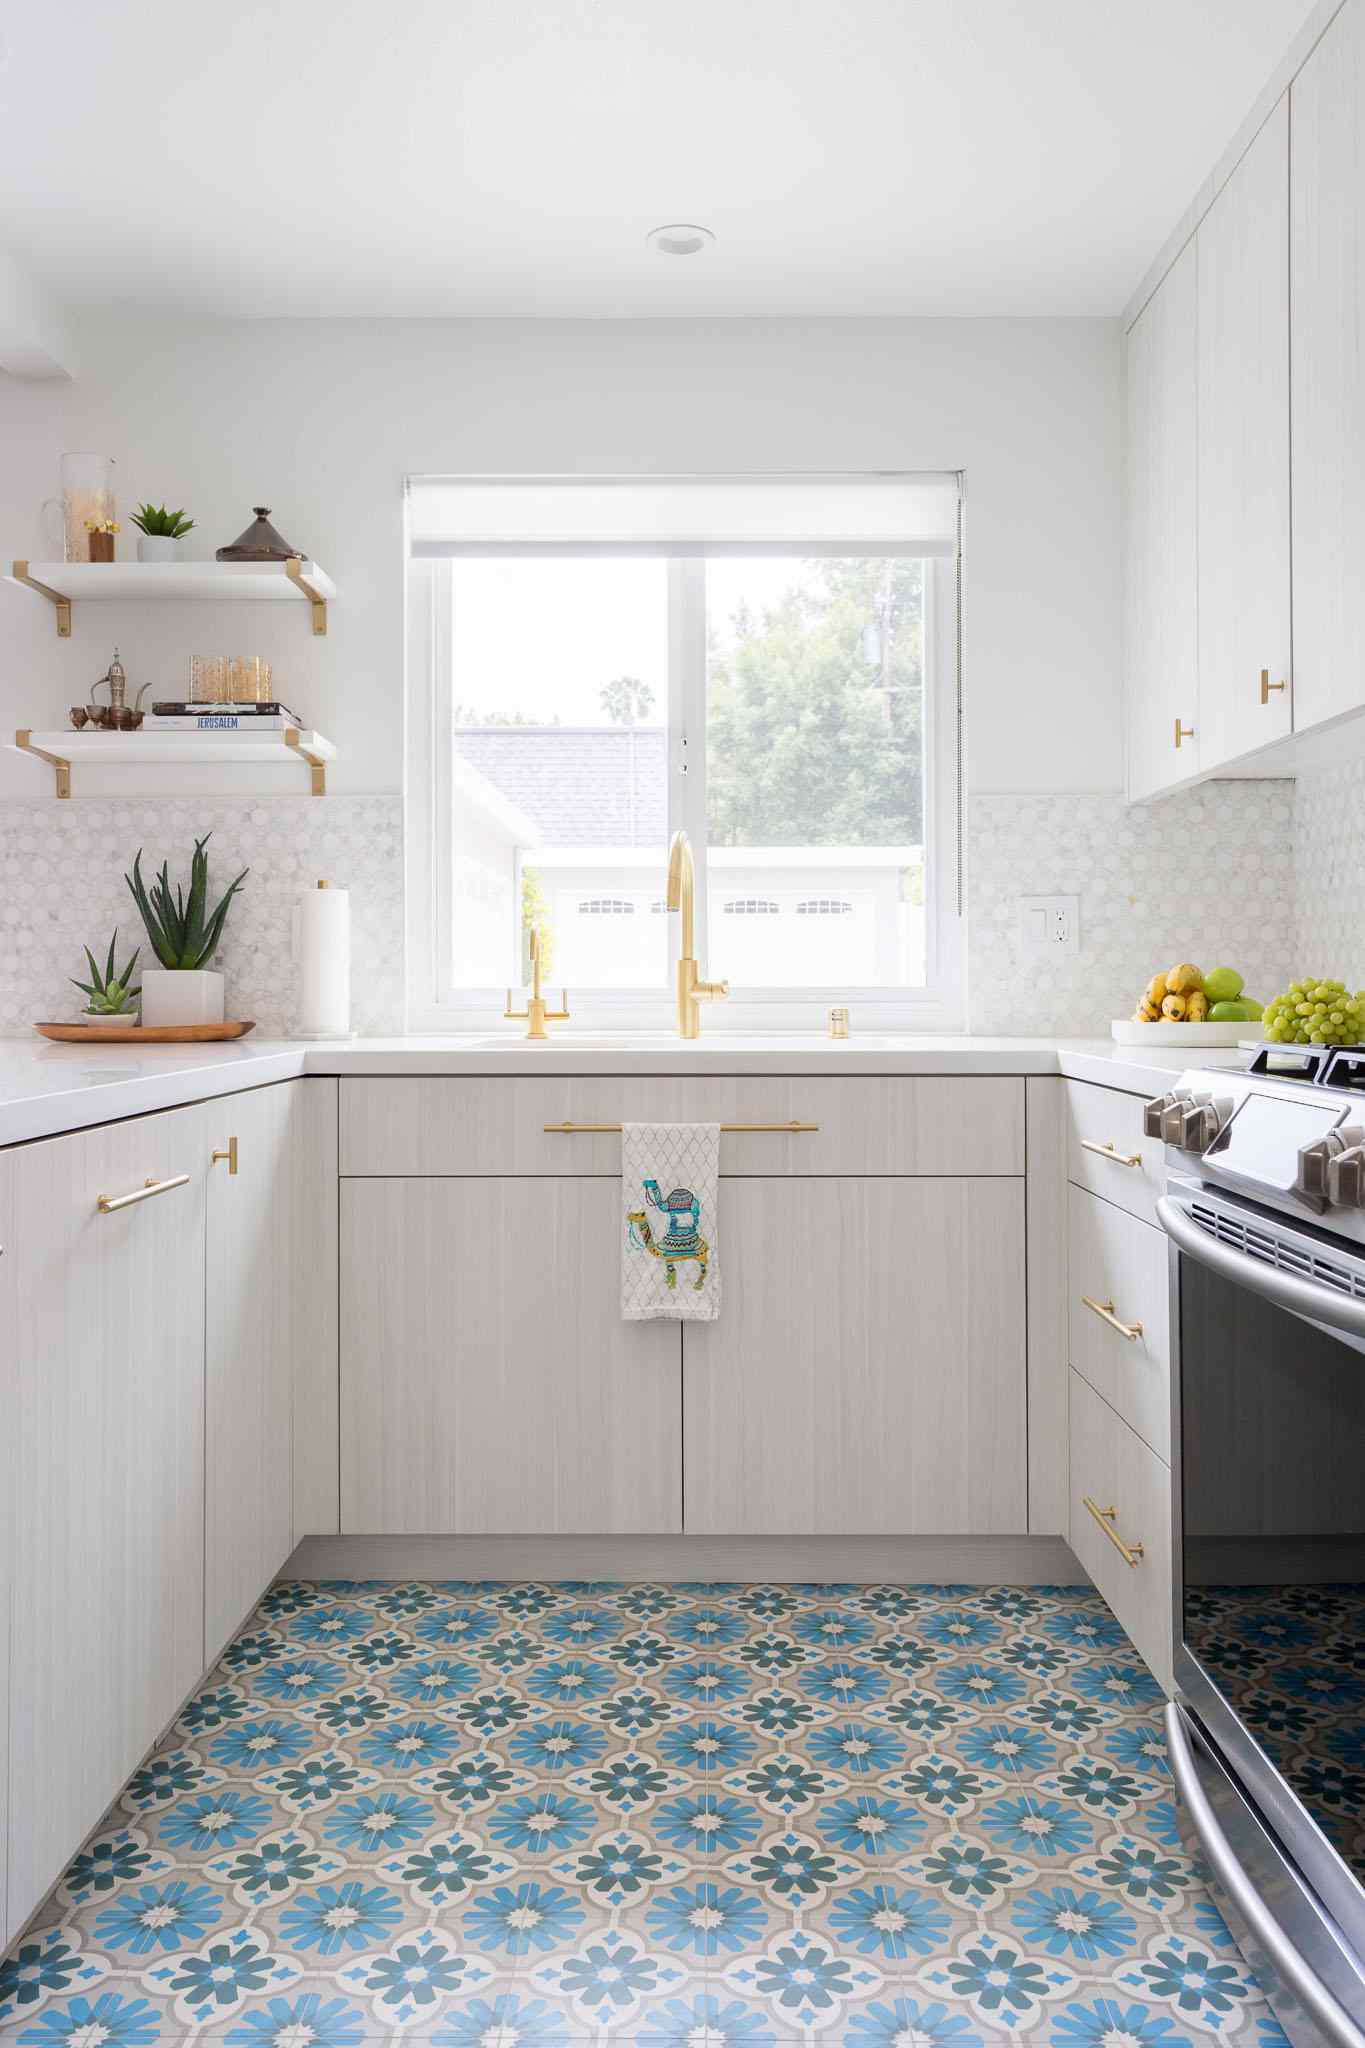 Colorful Floor Tiles in White Kitchen